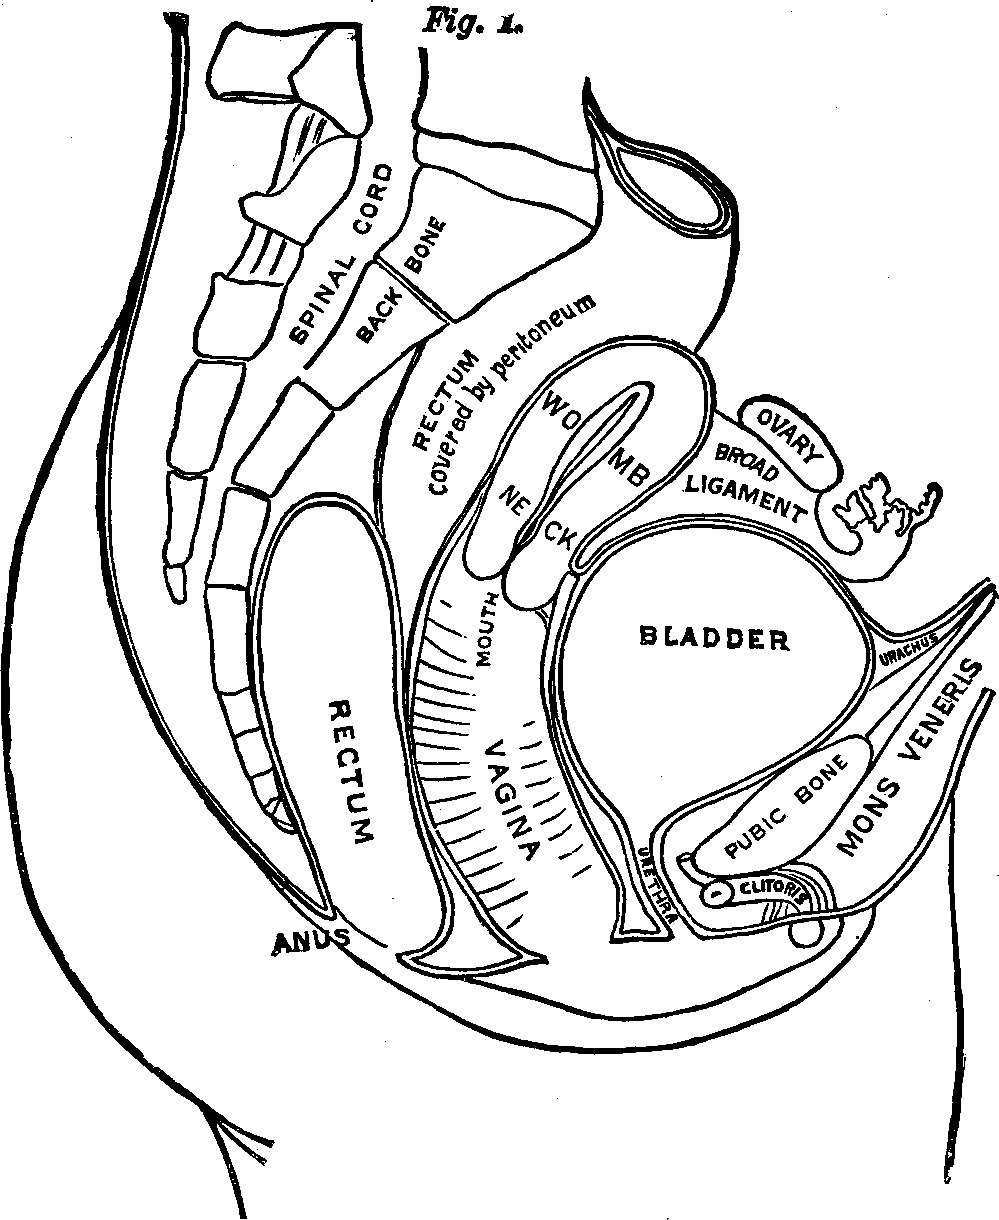 Illustration:
OUTLINE OF THE FEMALE URINARY AND GENERATIVE ORGANS.  The above cut is
introduced here to assist in conveying a correct idea of the Urinary and
Generative Organs of Woman, their form and relative positions, together
with the bones, muscles and other tissues forming the cavity of the pelvis
in which the organs rest, and by which they are protected. By dividing that
portion of the body directly through the middle from before backward, we
first cut through the cushion of fat (mons veneris) covering the pubic
bone, then in succession the bone, bladder, womb, vagina, rectum, front
half of spine, spinal marrow, rear half of spine, and lastly the muscles
and skin. Just underneath the bone in front is revealed that sensitive
organ, the clitoris, a facsimile of the male organ in miniature, the head
of which protrudes, while the body is covered with tissue, but is readily
traced with the finger. Further back is the urethra, or water passage,
which is one and a half inches long. Next is the vagina. When closed, its
mucous lining is folded in upon itself, and requires dilating in order to
be cleansed and to apply remedies. On the vagina rests the hollow,
pear-shaped womb, the small end of which protrudes into the vagina, and in
which is a small opening, leading through the neck into the cavity of the
organ. On either side of the womb, near its top, are the Fallopian tubes
leading to the ovaries, situated between the womb and hip bones. At every
menstruation these organs throw off a germ-cell, which passes through the
Fallopian tubes into the uterine cavity.